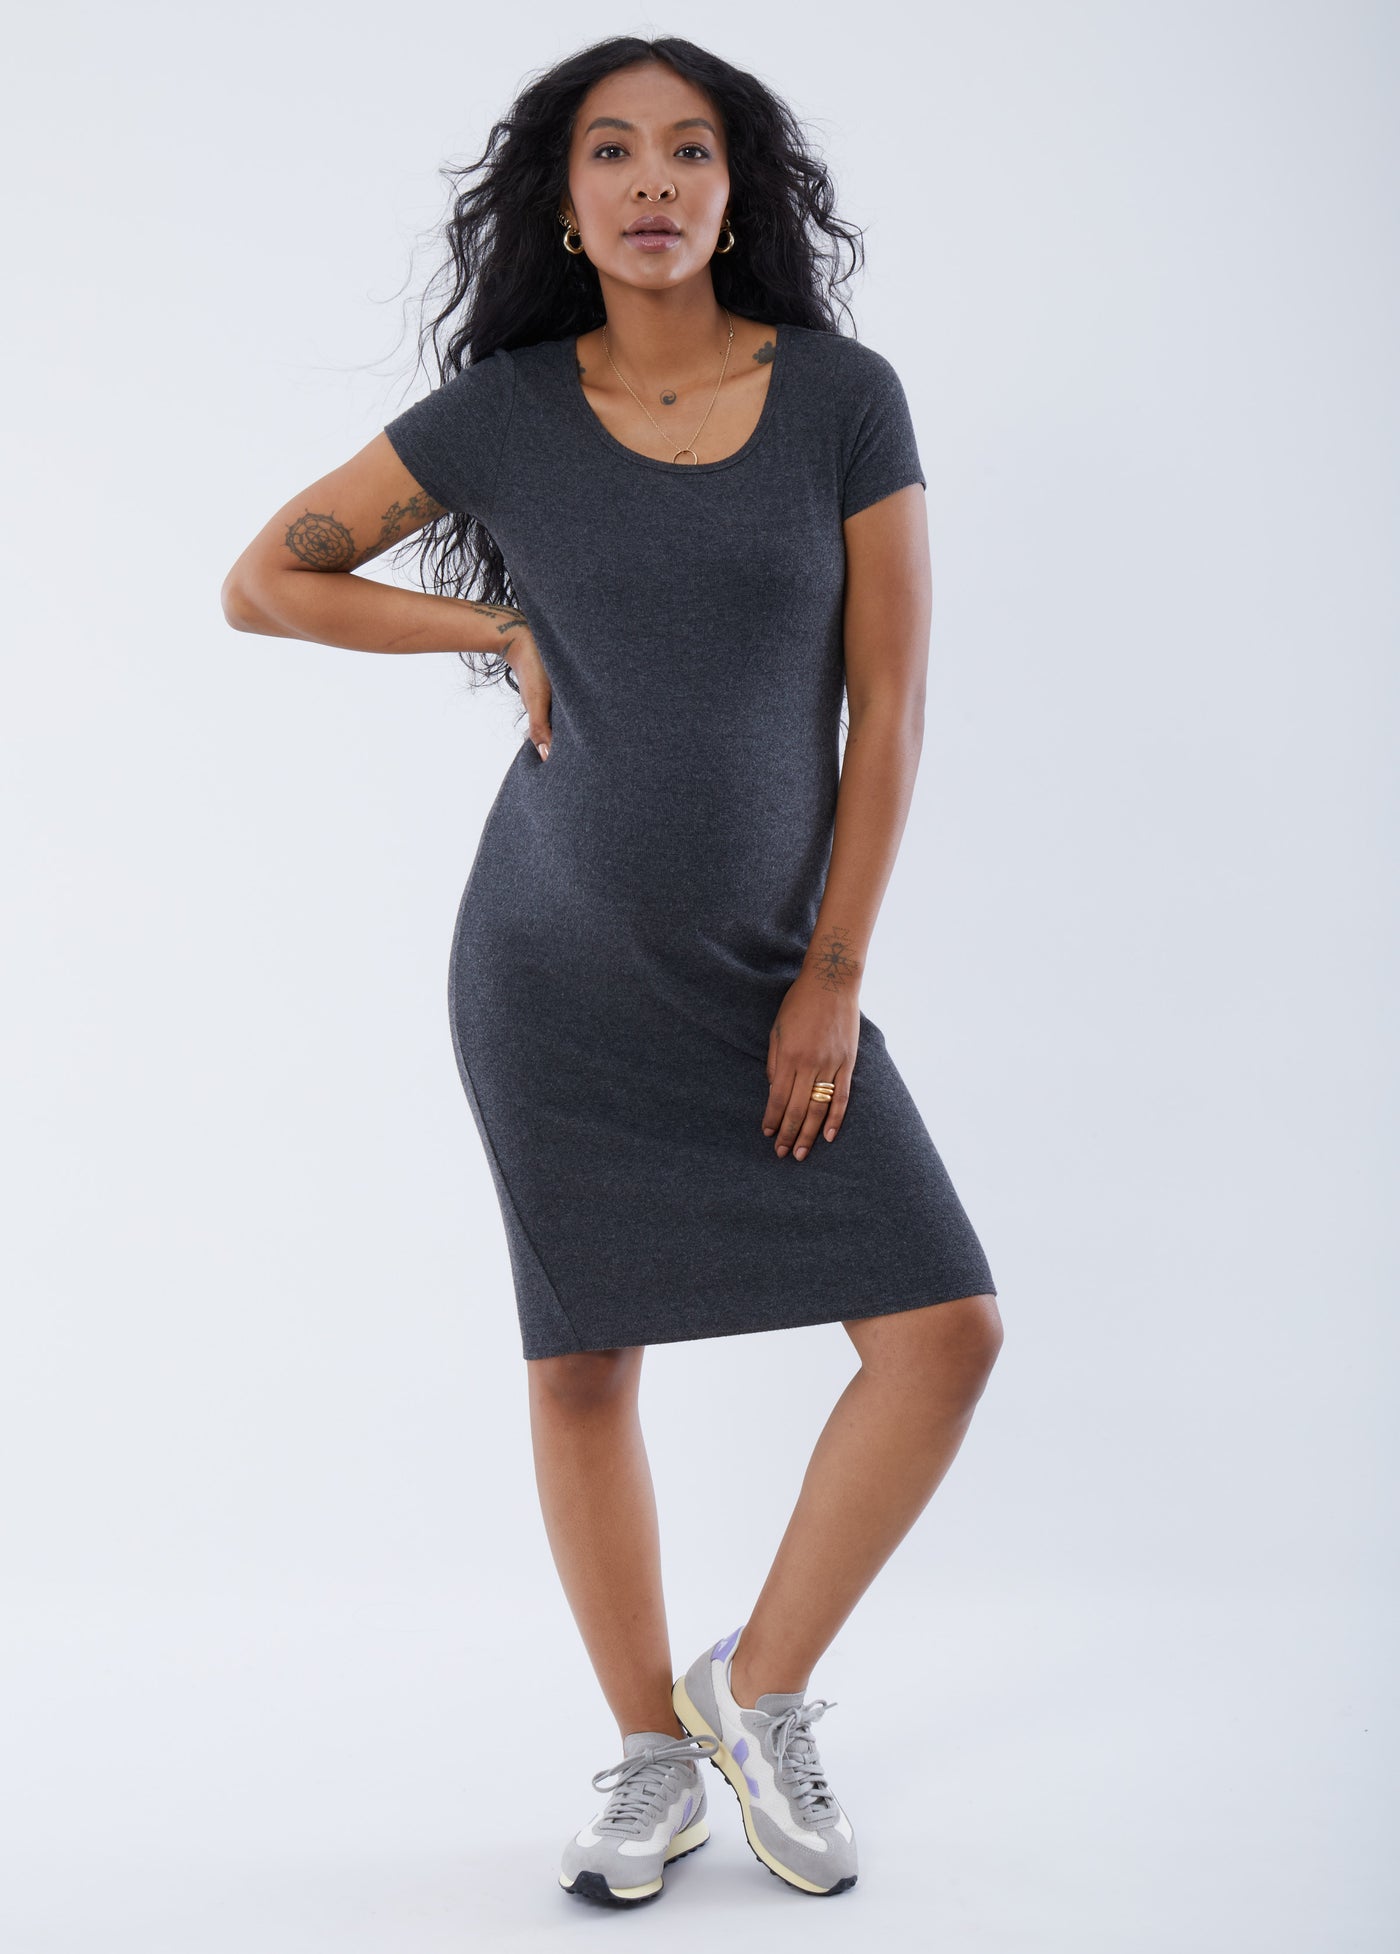 Synmia is 7 months pregnant, 5'10", wearing a size small||Charcoal Heather